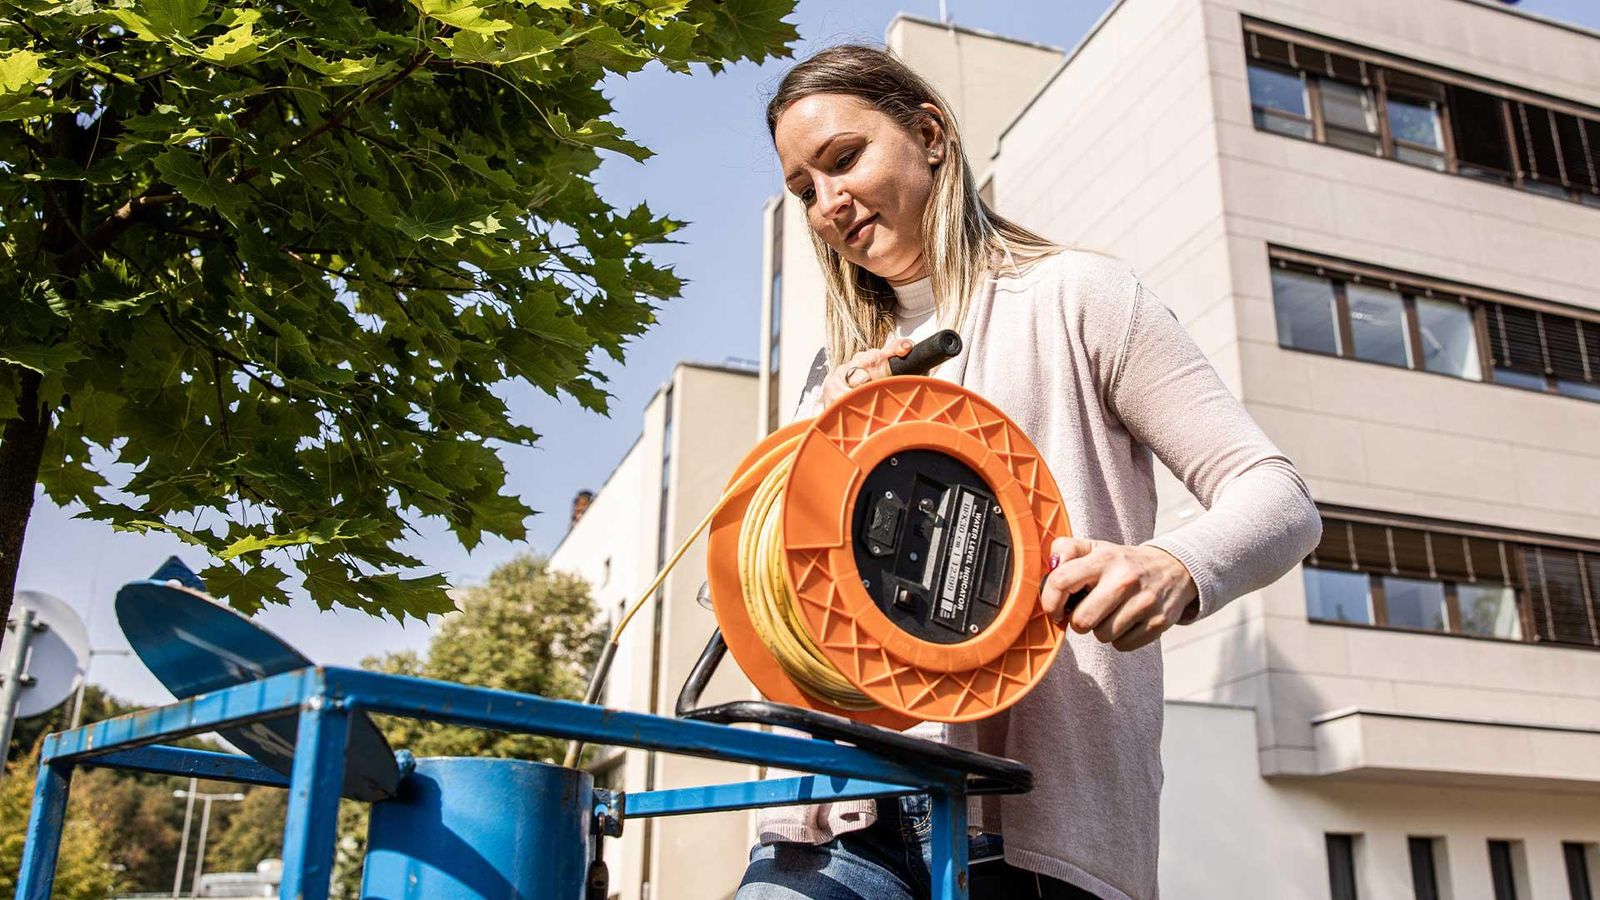 Laura Tisza is monitoring ground water with the monitoring system at the Sanofi plant in Csanyikvolgy, Hungary